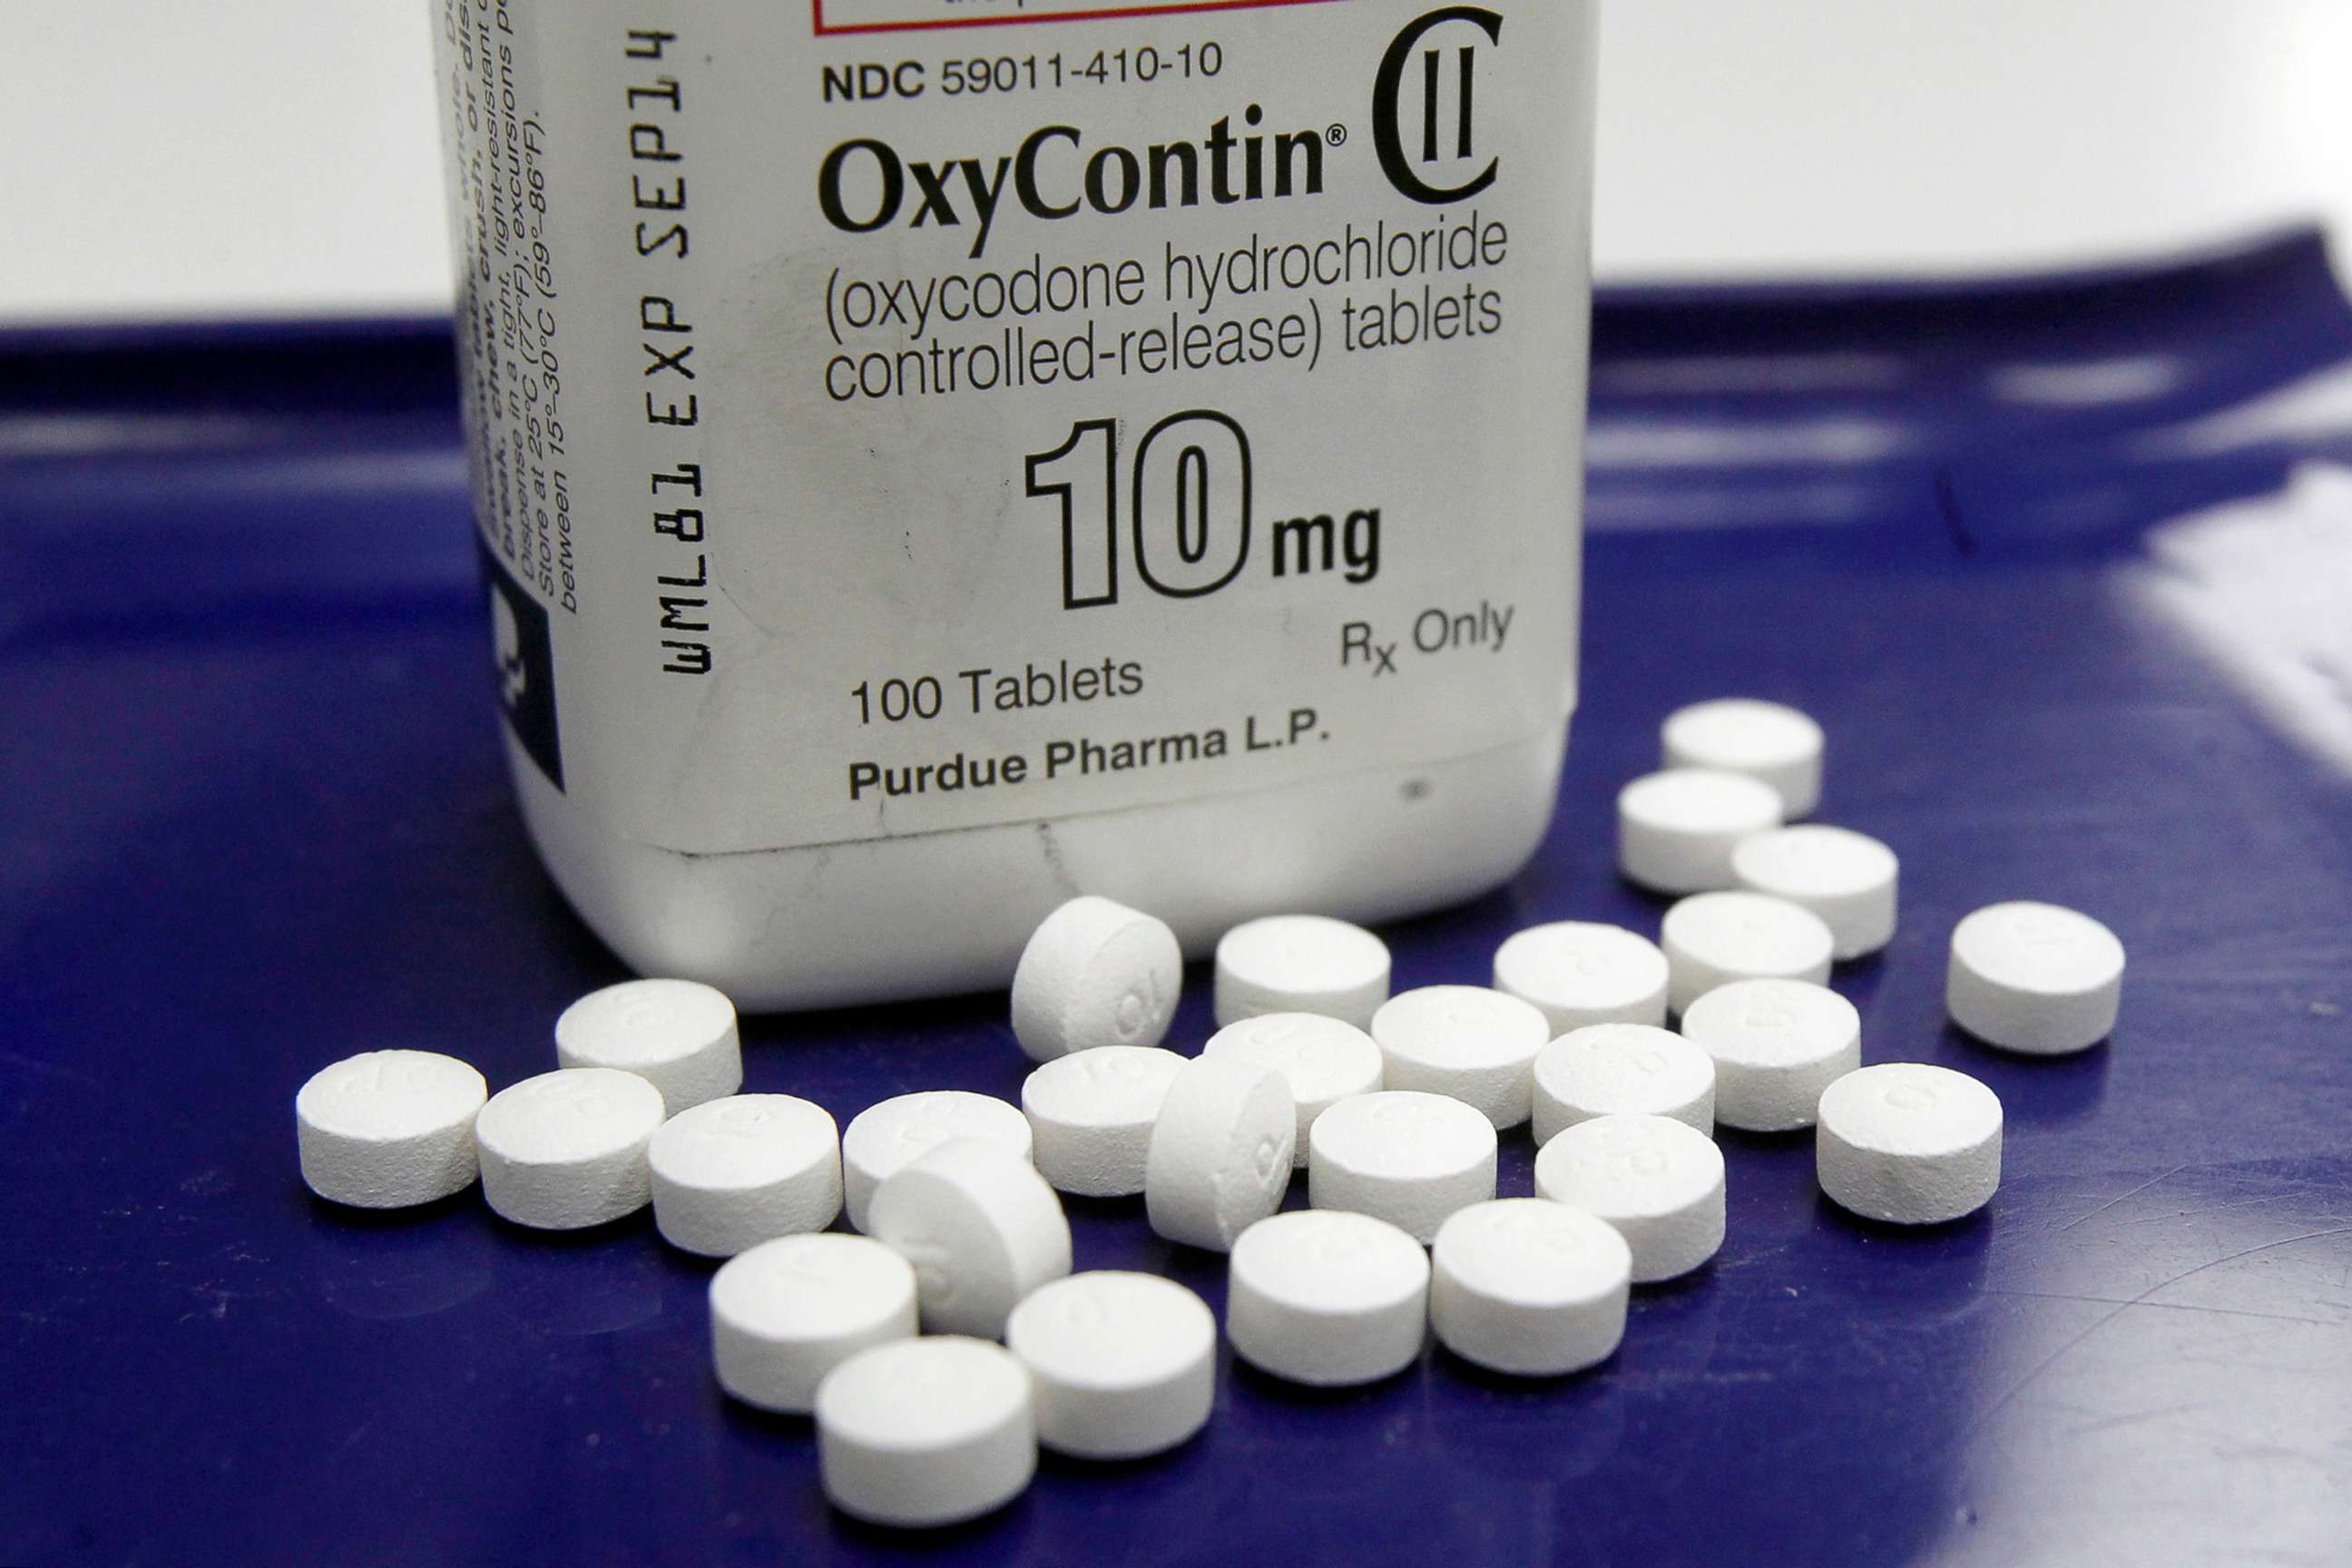 PHOTO: OxyContin pills and a bottle are arranged for a photo at a pharmacy in Montpelier, Vt., Feb. 19, 2013.